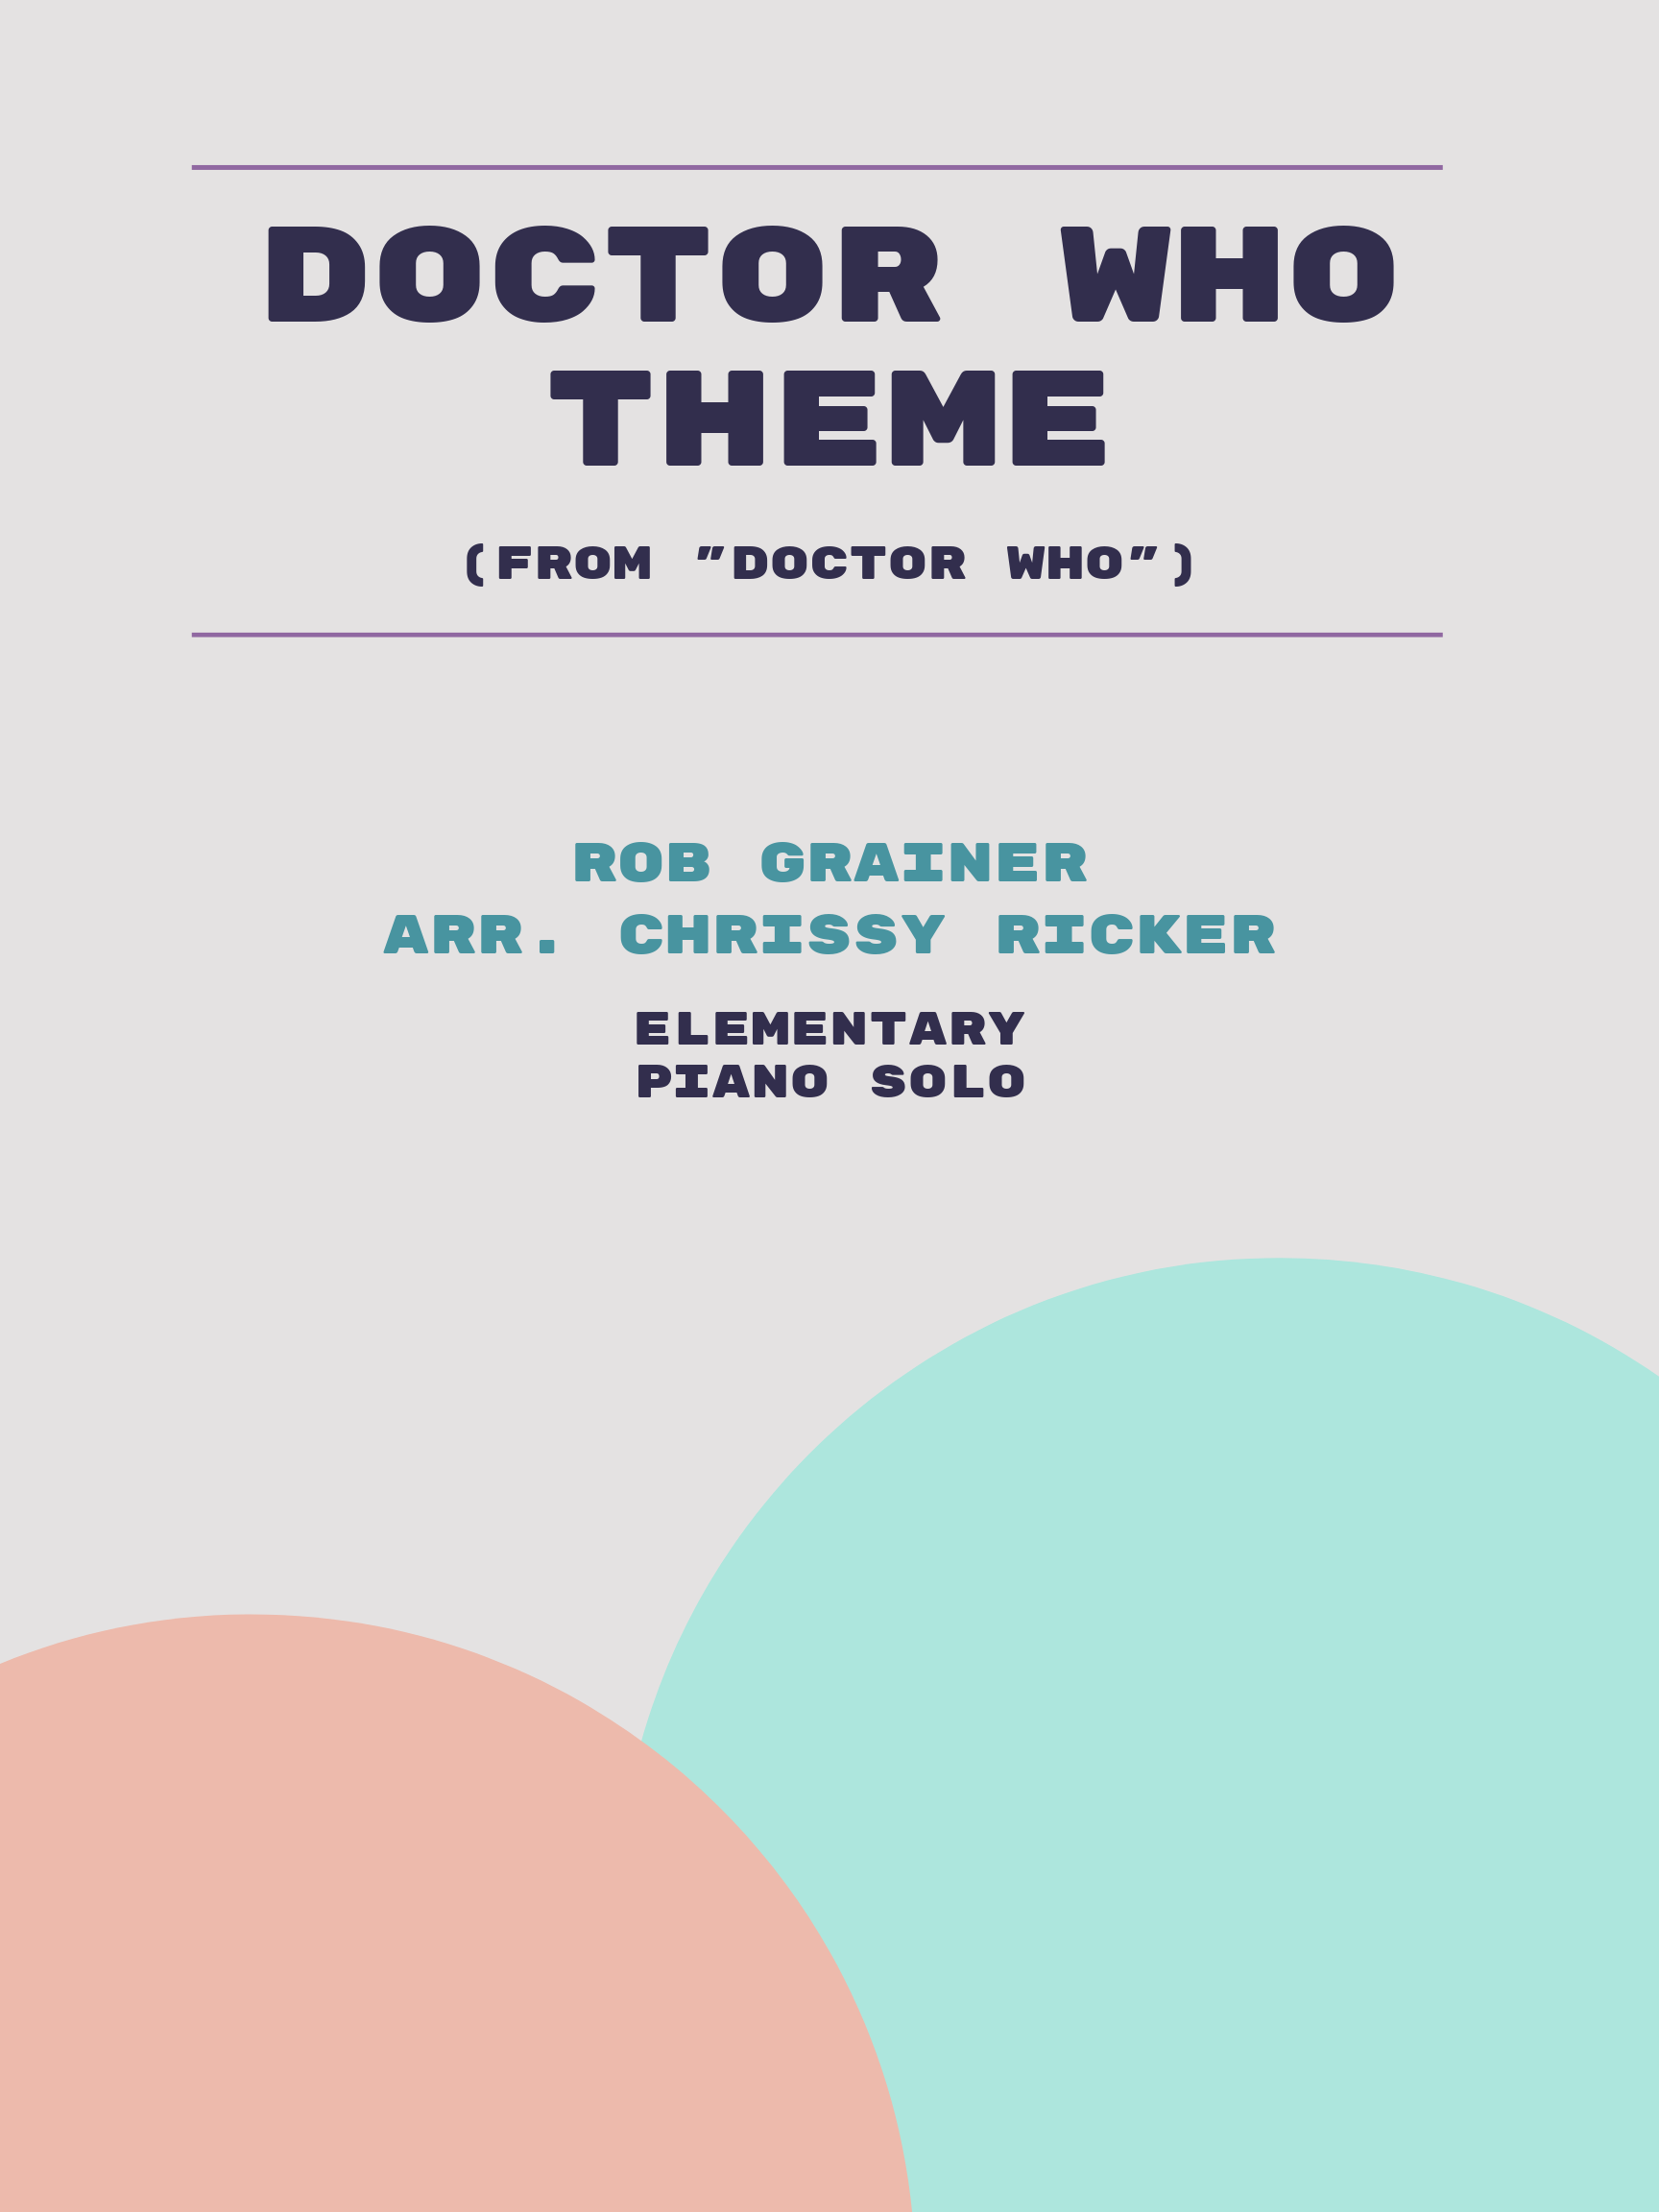 Doctor Who Theme by Rob Grainer